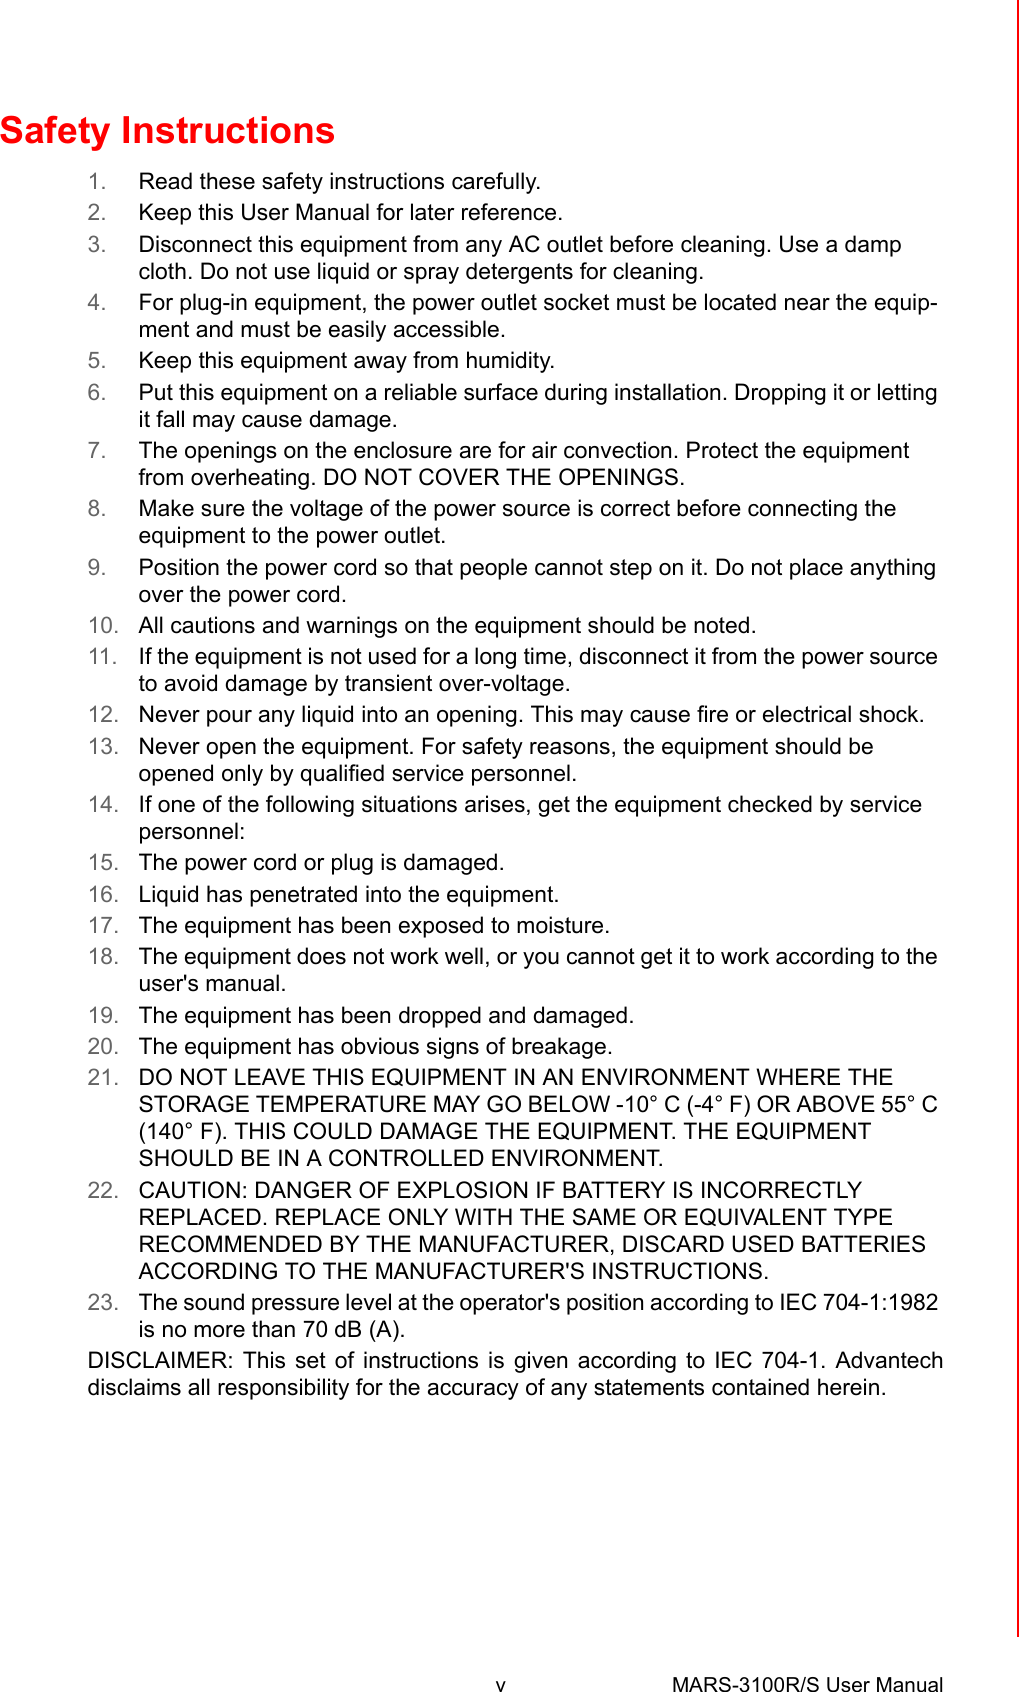 v MARS-3100R/S User Manual Safety Instructions1. Read these safety instructions carefully.2. Keep this User Manual for later reference.3. Disconnect this equipment from any AC outlet before cleaning. Use a damp cloth. Do not use liquid or spray detergents for cleaning.4. For plug-in equipment, the power outlet socket must be located near the equip-ment and must be easily accessible.5. Keep this equipment away from humidity.6. Put this equipment on a reliable surface during installation. Dropping it or letting it fall may cause damage.7. The openings on the enclosure are for air convection. Protect the equipment from overheating. DO NOT COVER THE OPENINGS.8. Make sure the voltage of the power source is correct before connecting the equipment to the power outlet.9. Position the power cord so that people cannot step on it. Do not place anything over the power cord.10. All cautions and warnings on the equipment should be noted.11. If the equipment is not used for a long time, disconnect it from the power source to avoid damage by transient over-voltage.12. Never pour any liquid into an opening. This may cause fire or electrical shock.13. Never open the equipment. For safety reasons, the equipment should be opened only by qualified service personnel.14. If one of the following situations arises, get the equipment checked by service personnel:15. The power cord or plug is damaged.16. Liquid has penetrated into the equipment.17. The equipment has been exposed to moisture.18. The equipment does not work well, or you cannot get it to work according to the user&apos;s manual.19. The equipment has been dropped and damaged.20. The equipment has obvious signs of breakage.21. DO NOT LEAVE THIS EQUIPMENT IN AN ENVIRONMENT WHERE THE STORAGE TEMPERATURE MAY GO BELOW -10° C (-4° F) OR ABOVE 55° C (140° F). THIS COULD DAMAGE THE EQUIPMENT. THE EQUIPMENT SHOULD BE IN A CONTROLLED ENVIRONMENT.22. CAUTION: DANGER OF EXPLOSION IF BATTERY IS INCORRECTLY REPLACED. REPLACE ONLY WITH THE SAME OR EQUIVALENT TYPE RECOMMENDED BY THE MANUFACTURER, DISCARD USED BATTERIES ACCORDING TO THE MANUFACTURER&apos;S INSTRUCTIONS.23. The sound pressure level at the operator&apos;s position according to IEC 704-1:1982 is no more than 70 dB (A).DISCLAIMER: This set of instructions is given according to IEC 704-1. Advantechdisclaims all responsibility for the accuracy of any statements contained herein.